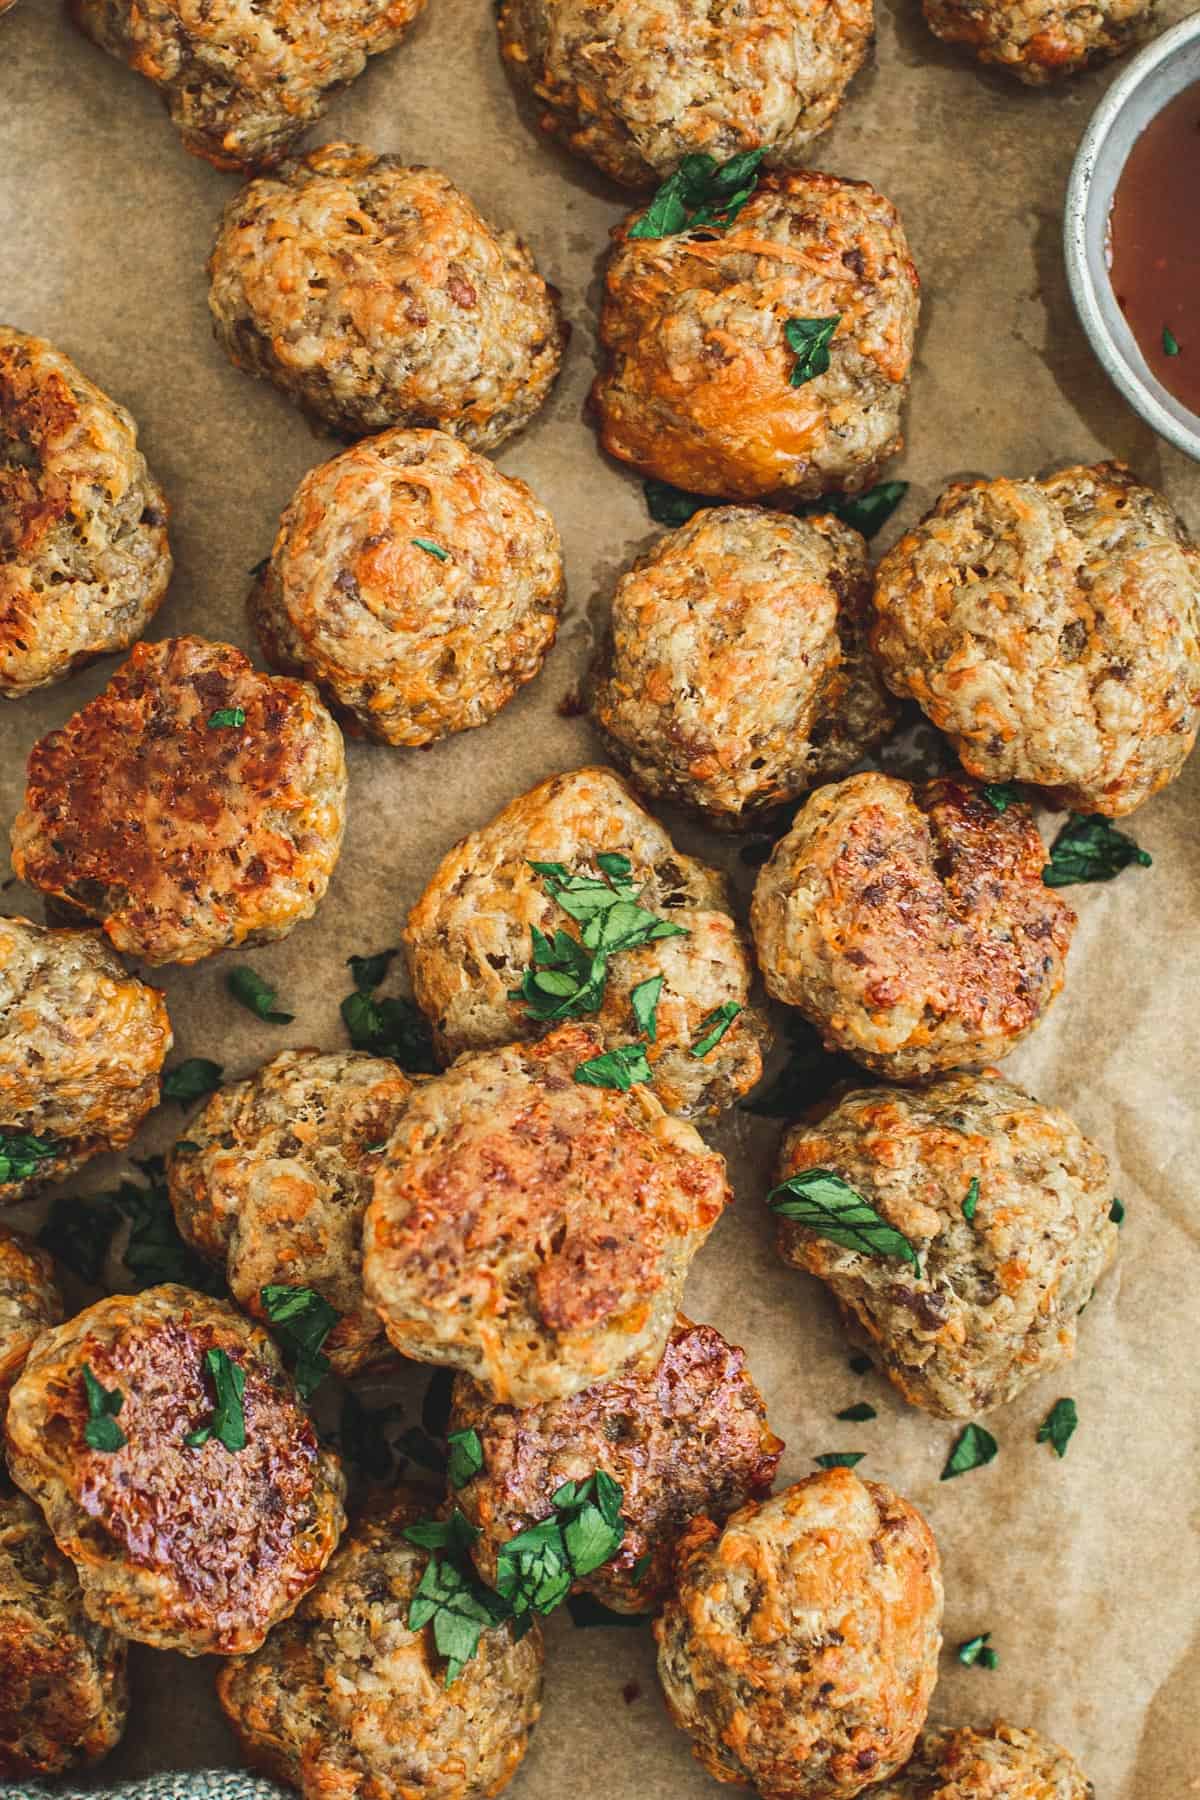 Sausage and cheese balls with chopped parsley on top.